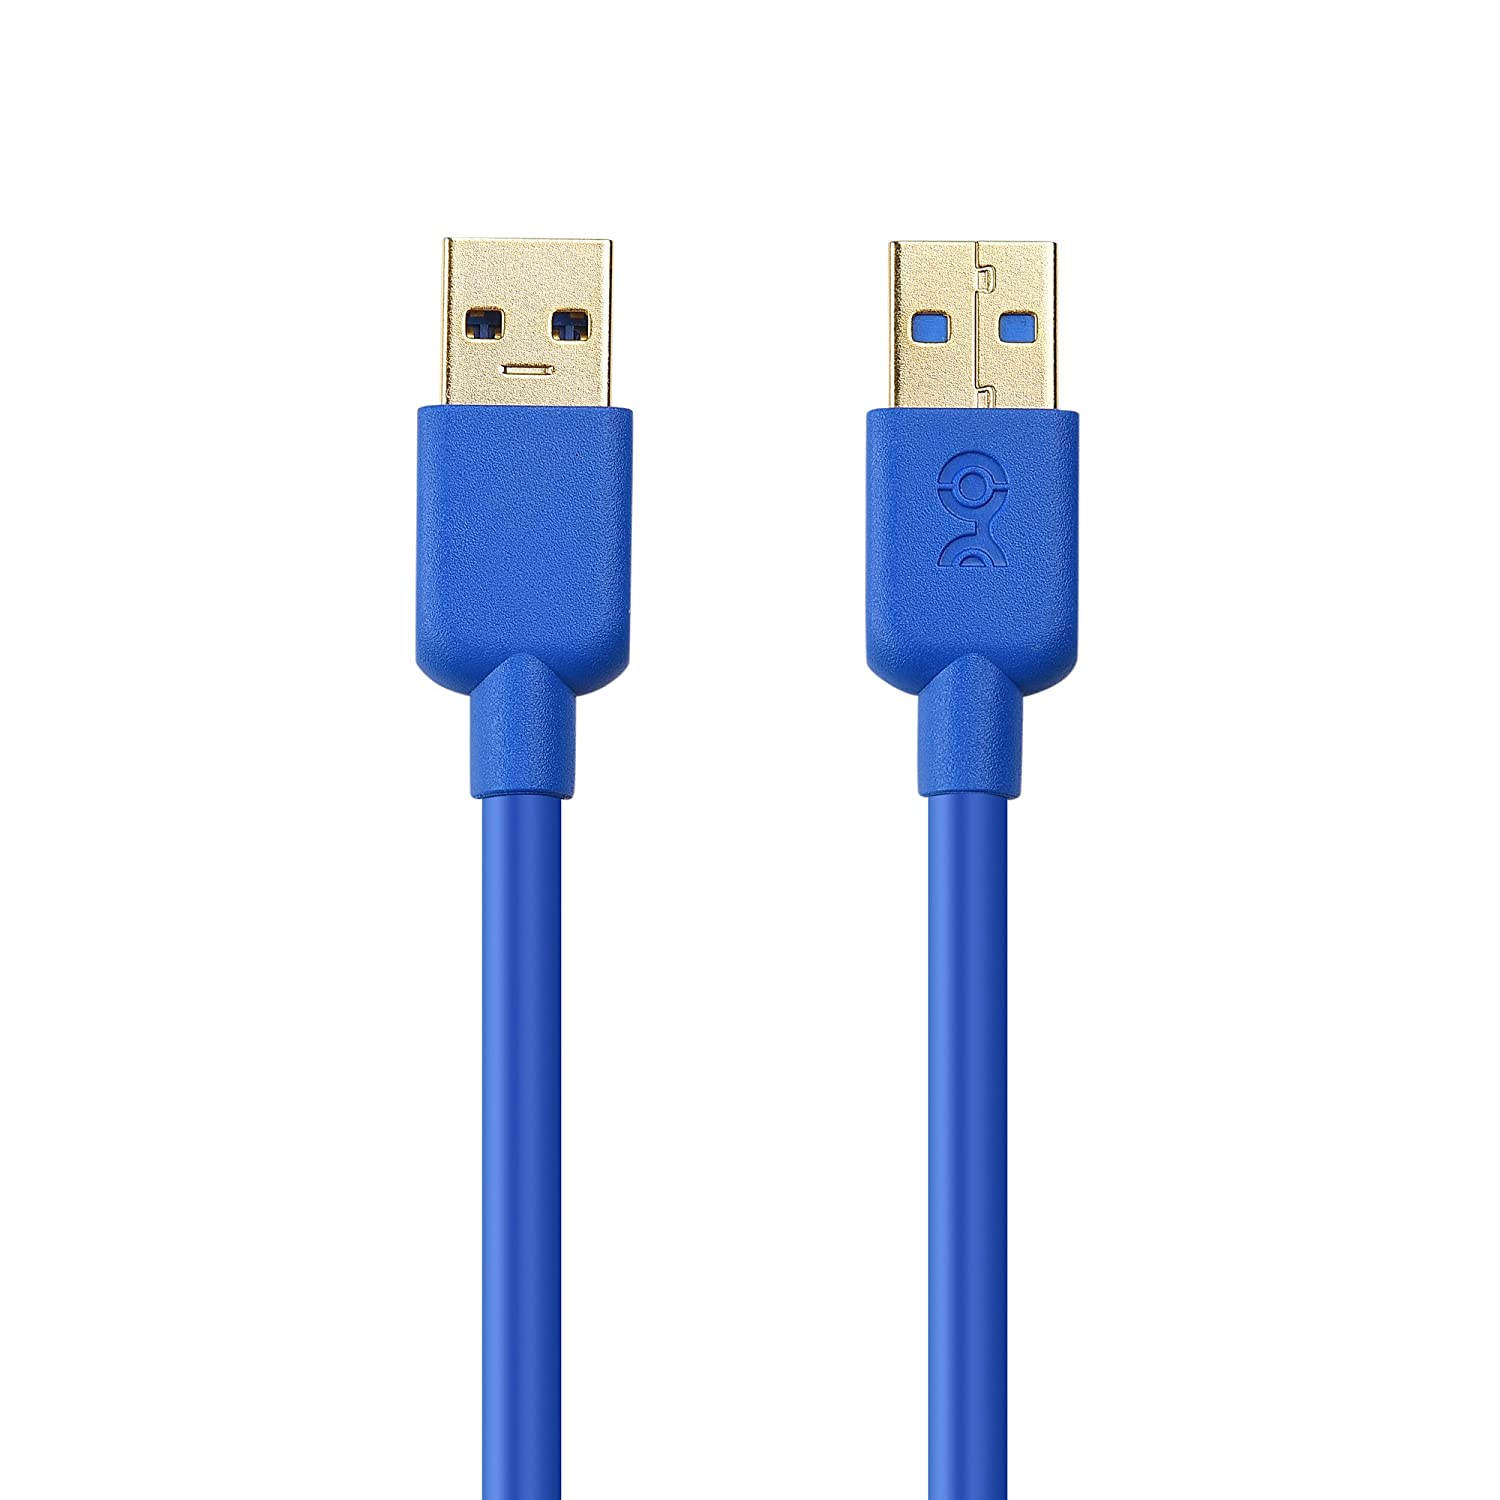 Cable Matters USB 3.0 Cable (USB to USB Cable Male to Male) in Blue 10 Feet - image 3 of 4